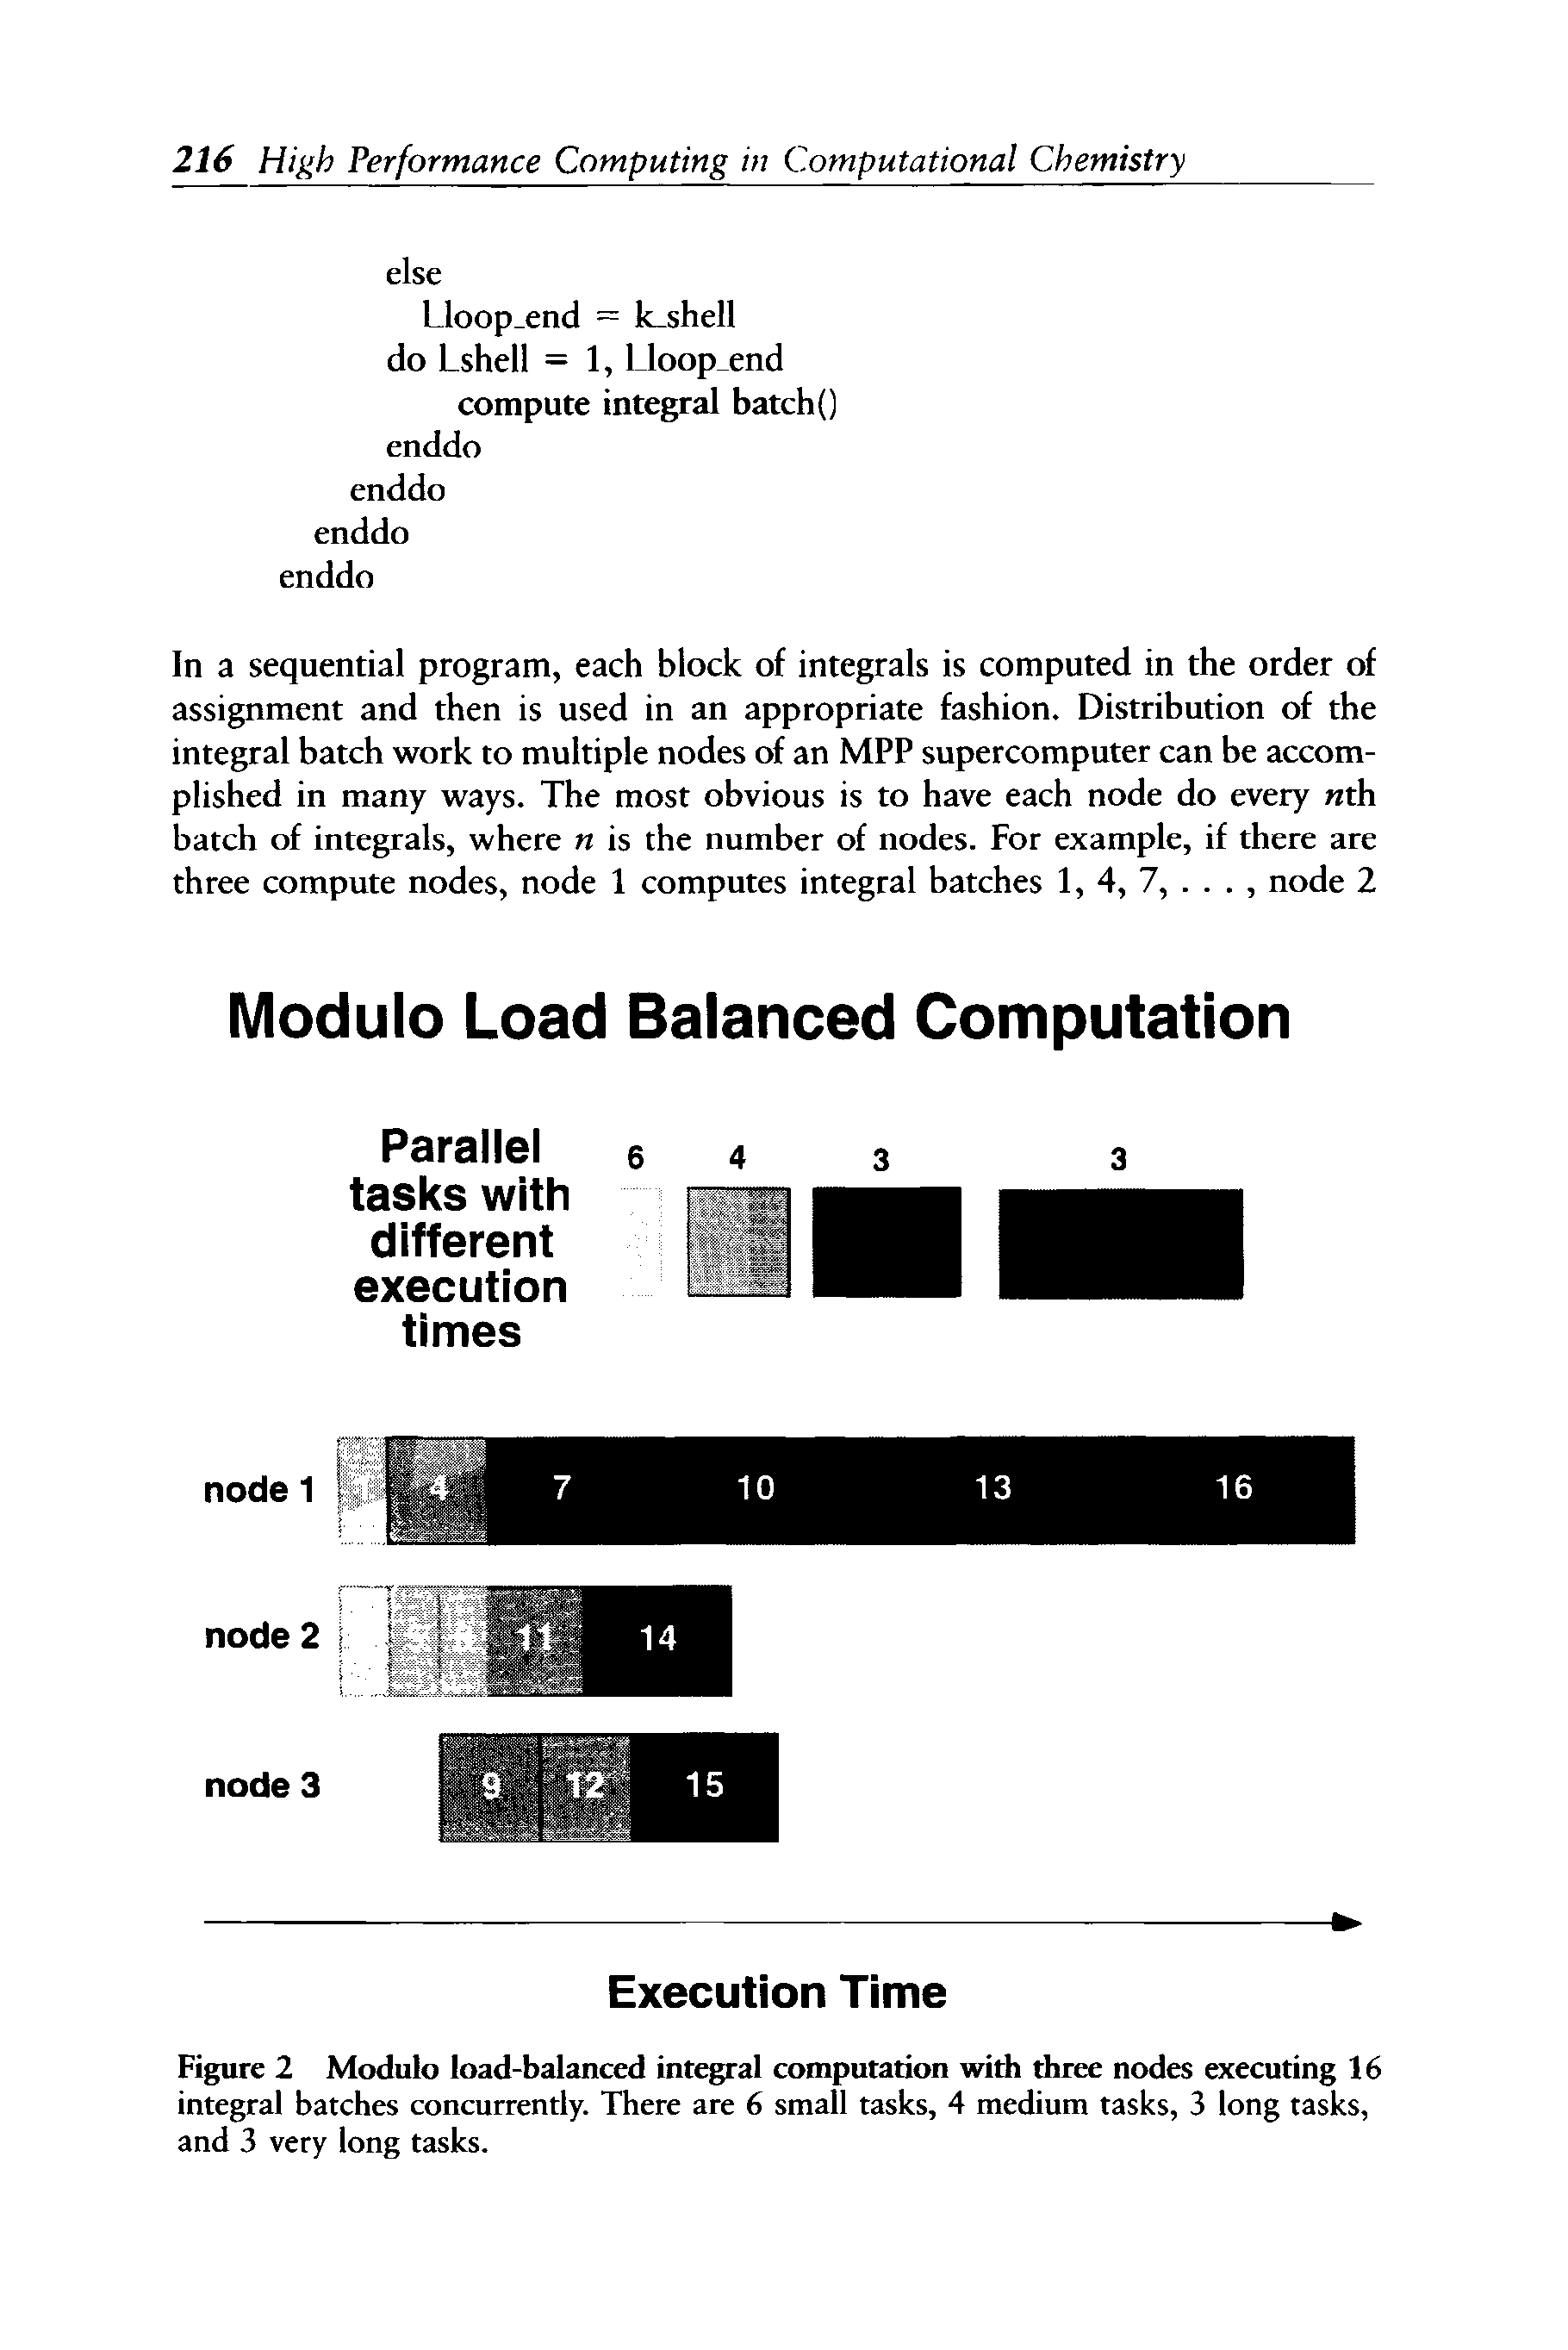 Figure 2 Modulo load-balanced integral computation with three nodes executing 16 integral batches concurrently. There are 6 small tasks, 4 medium tasks, 3 long tasks, and 3 very long tasks.